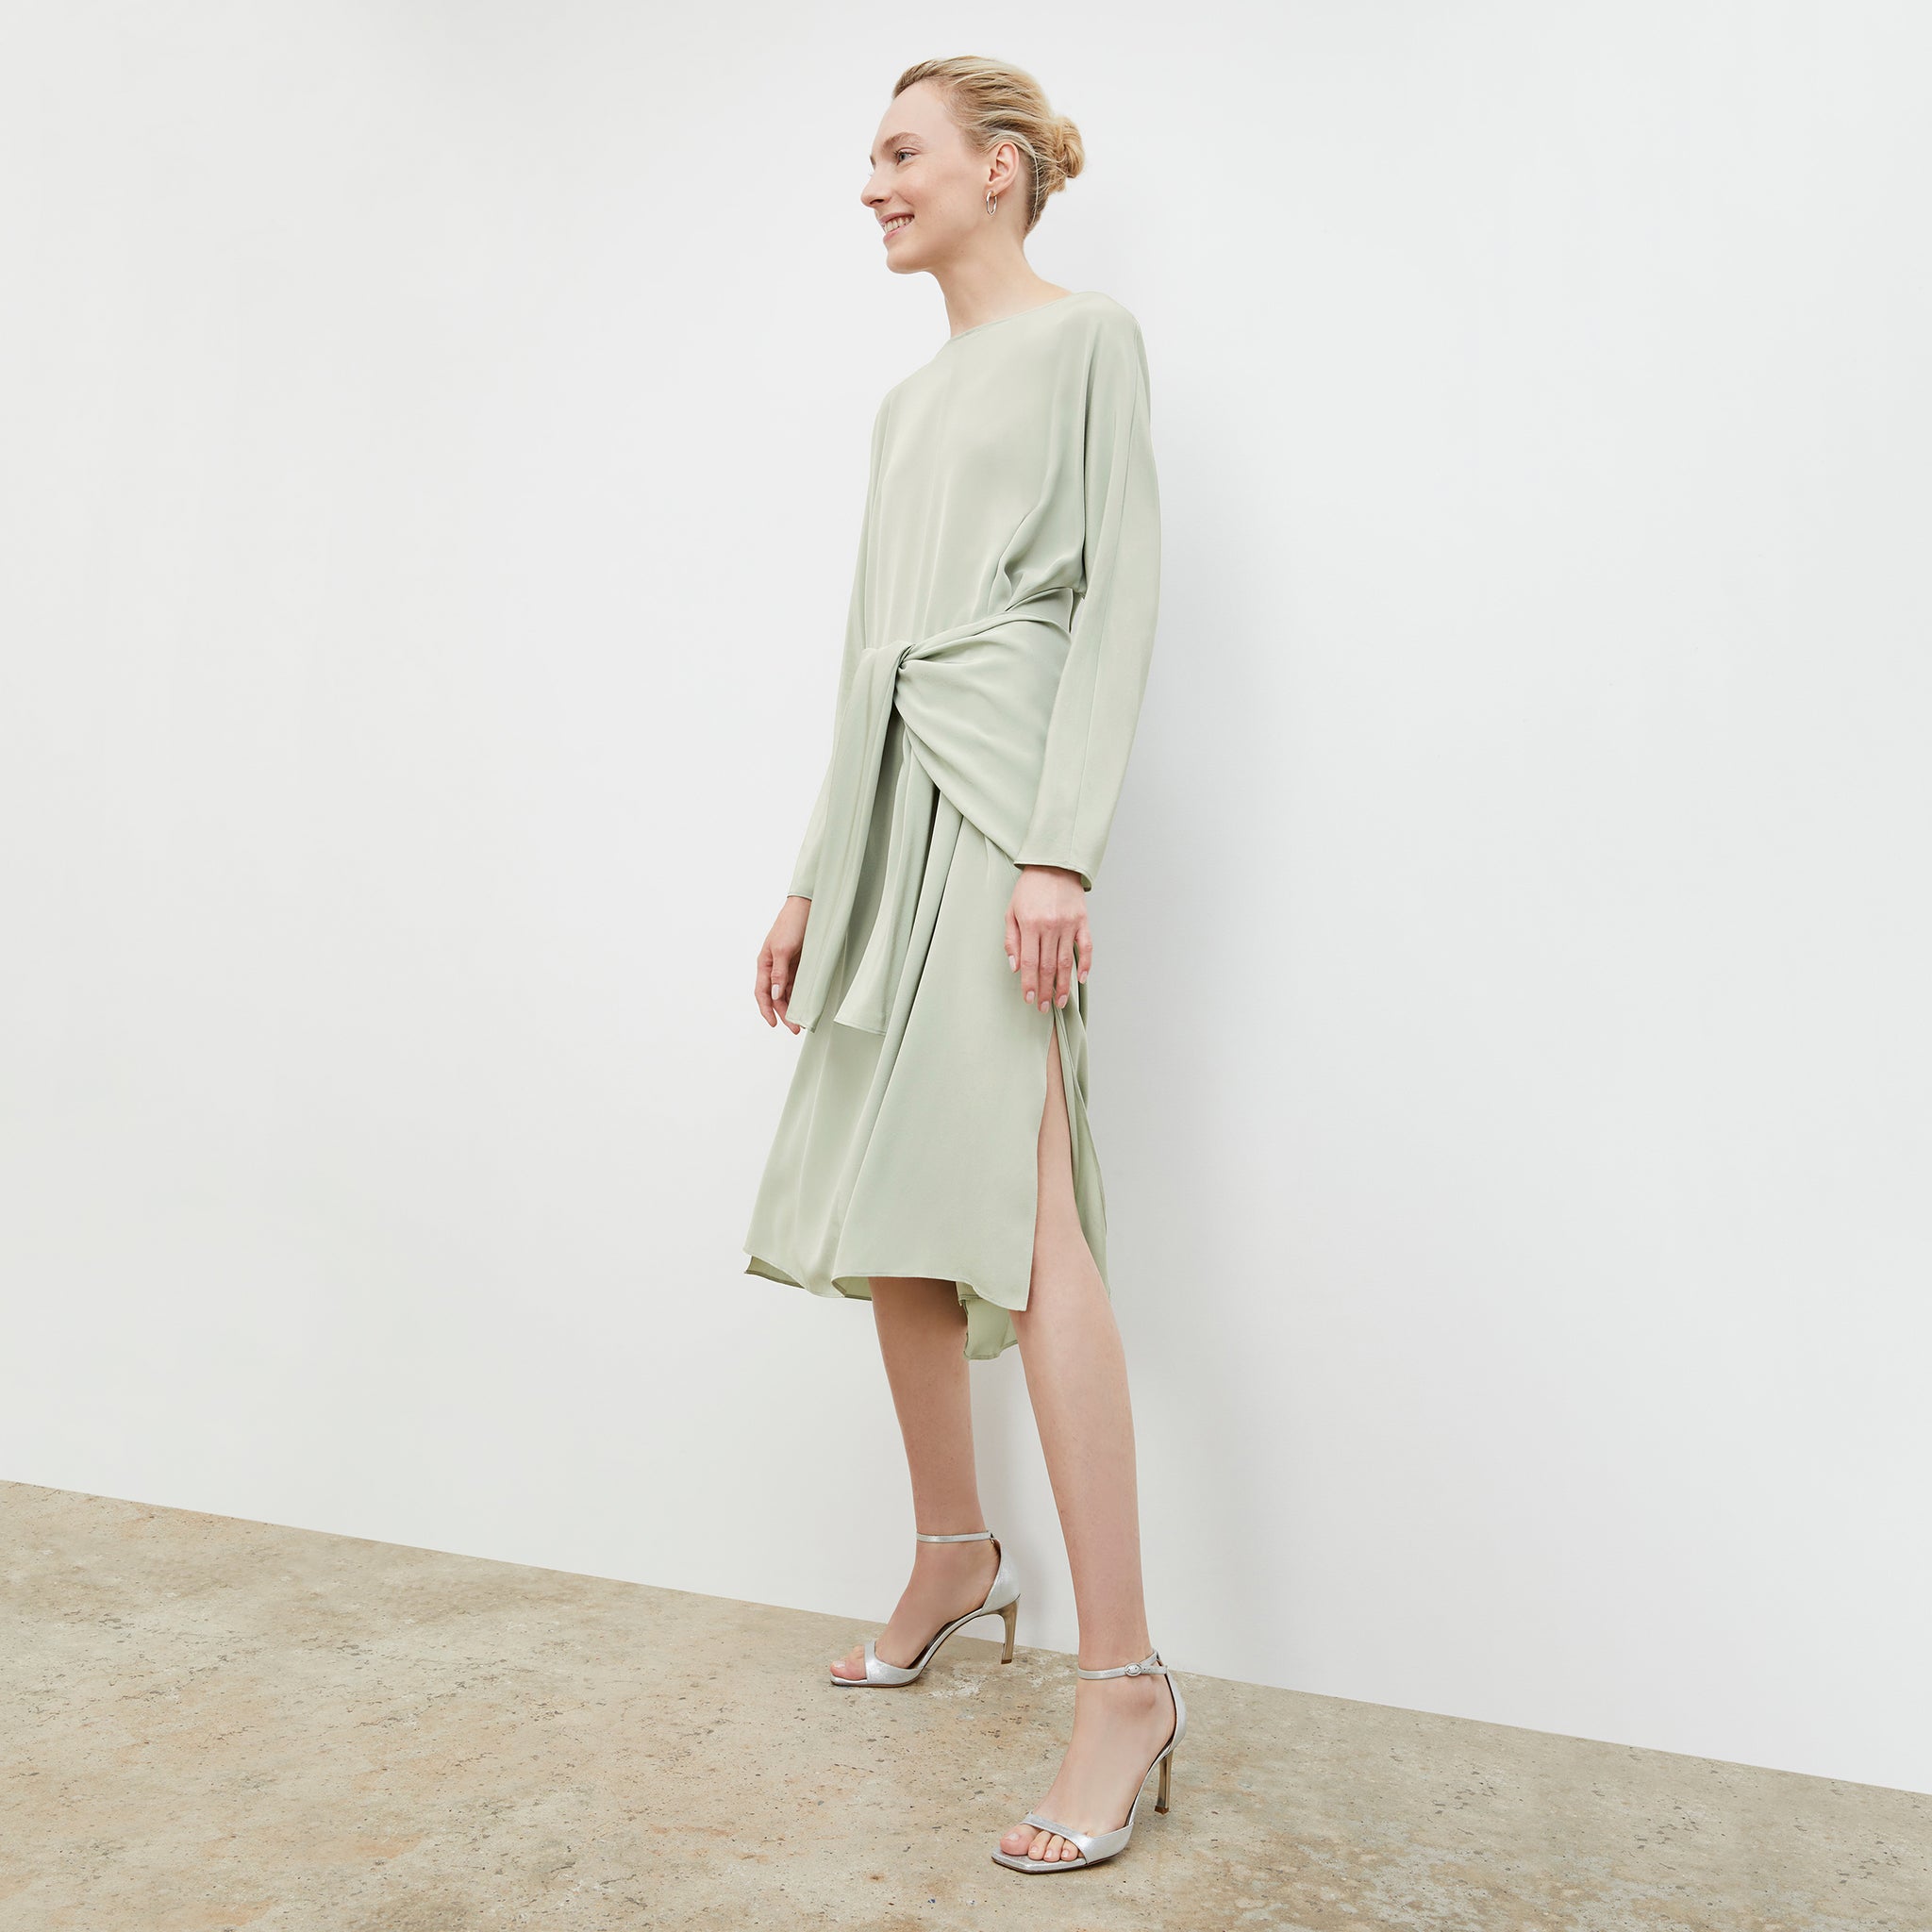 Front image of a woman wearing the Rashmeen dress in Minty Green